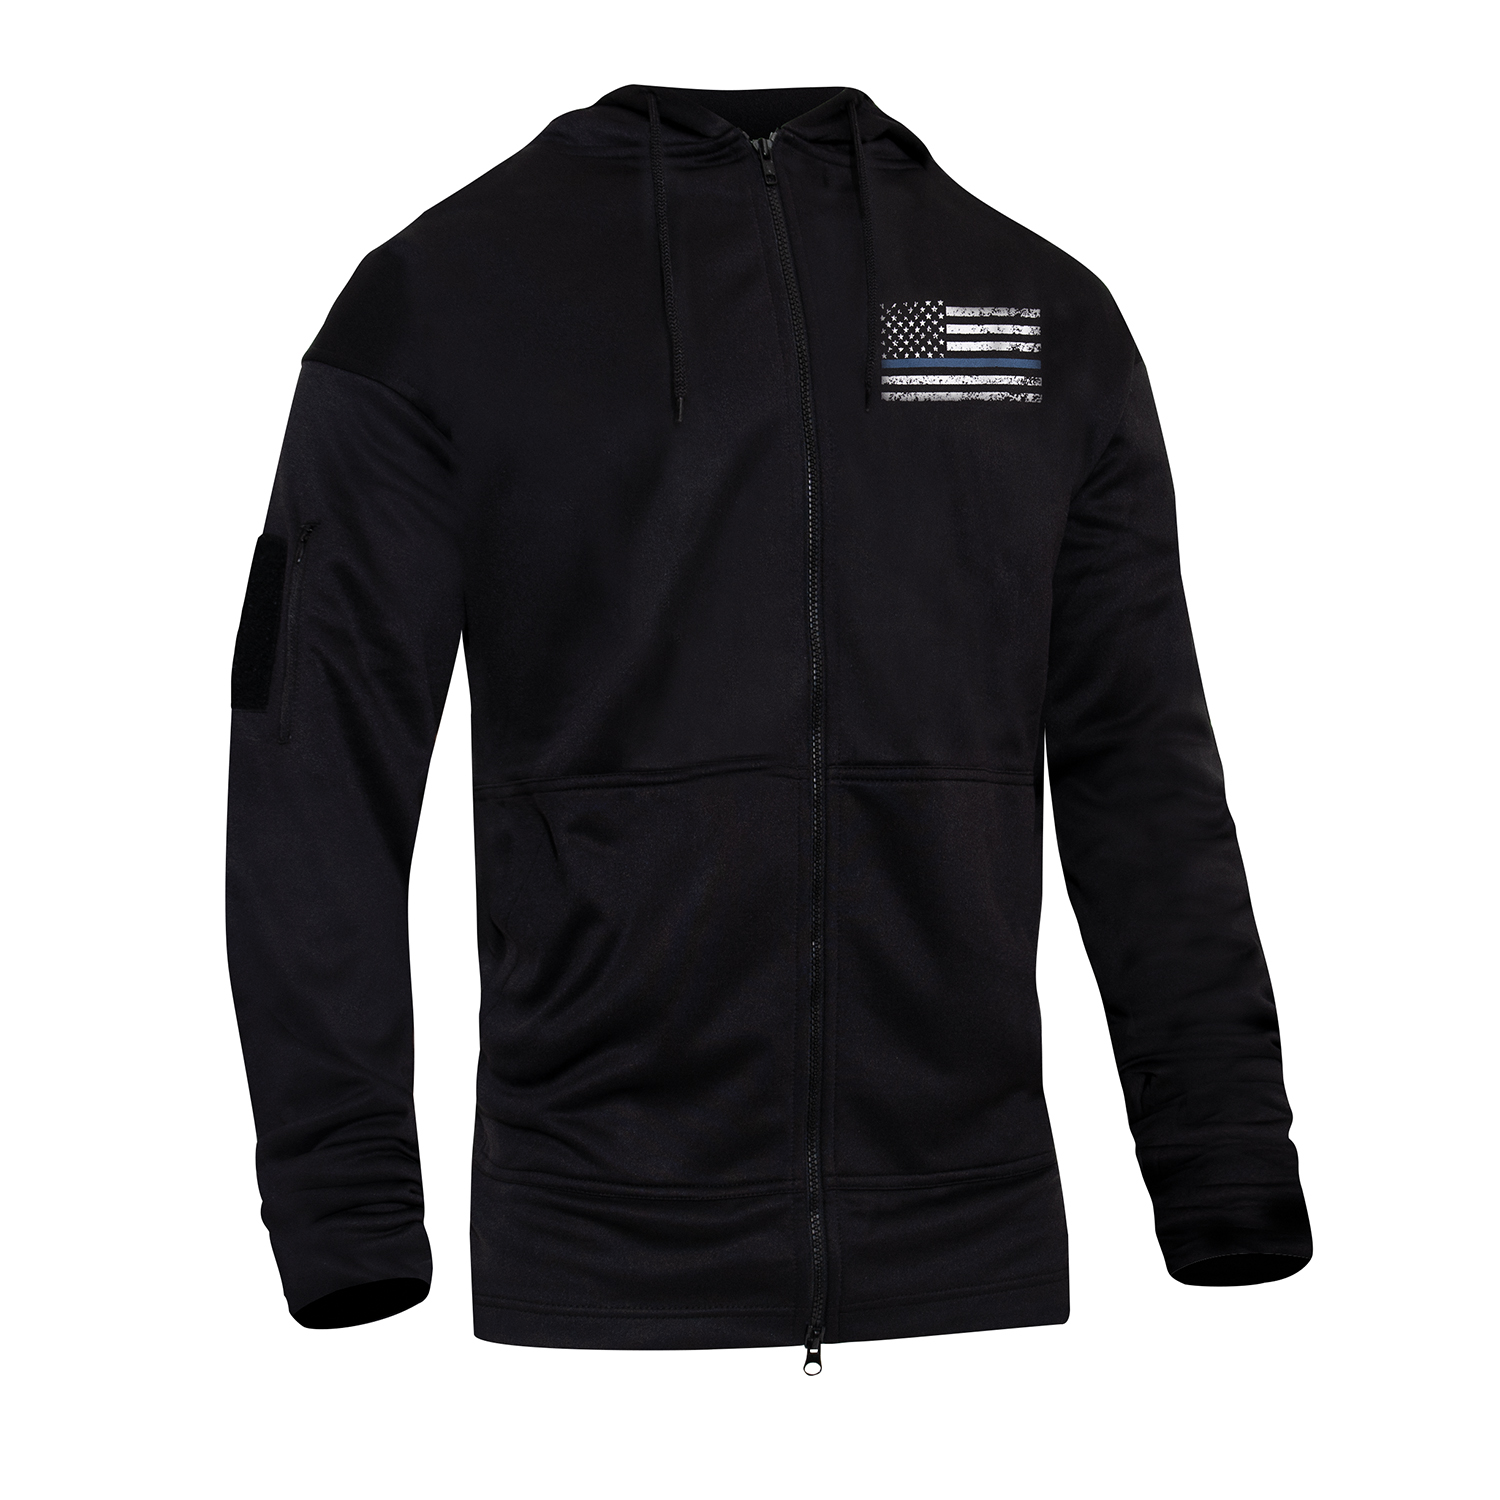 Rothco Thin Blue Line Concealed Carry Zippered Hoodie Black